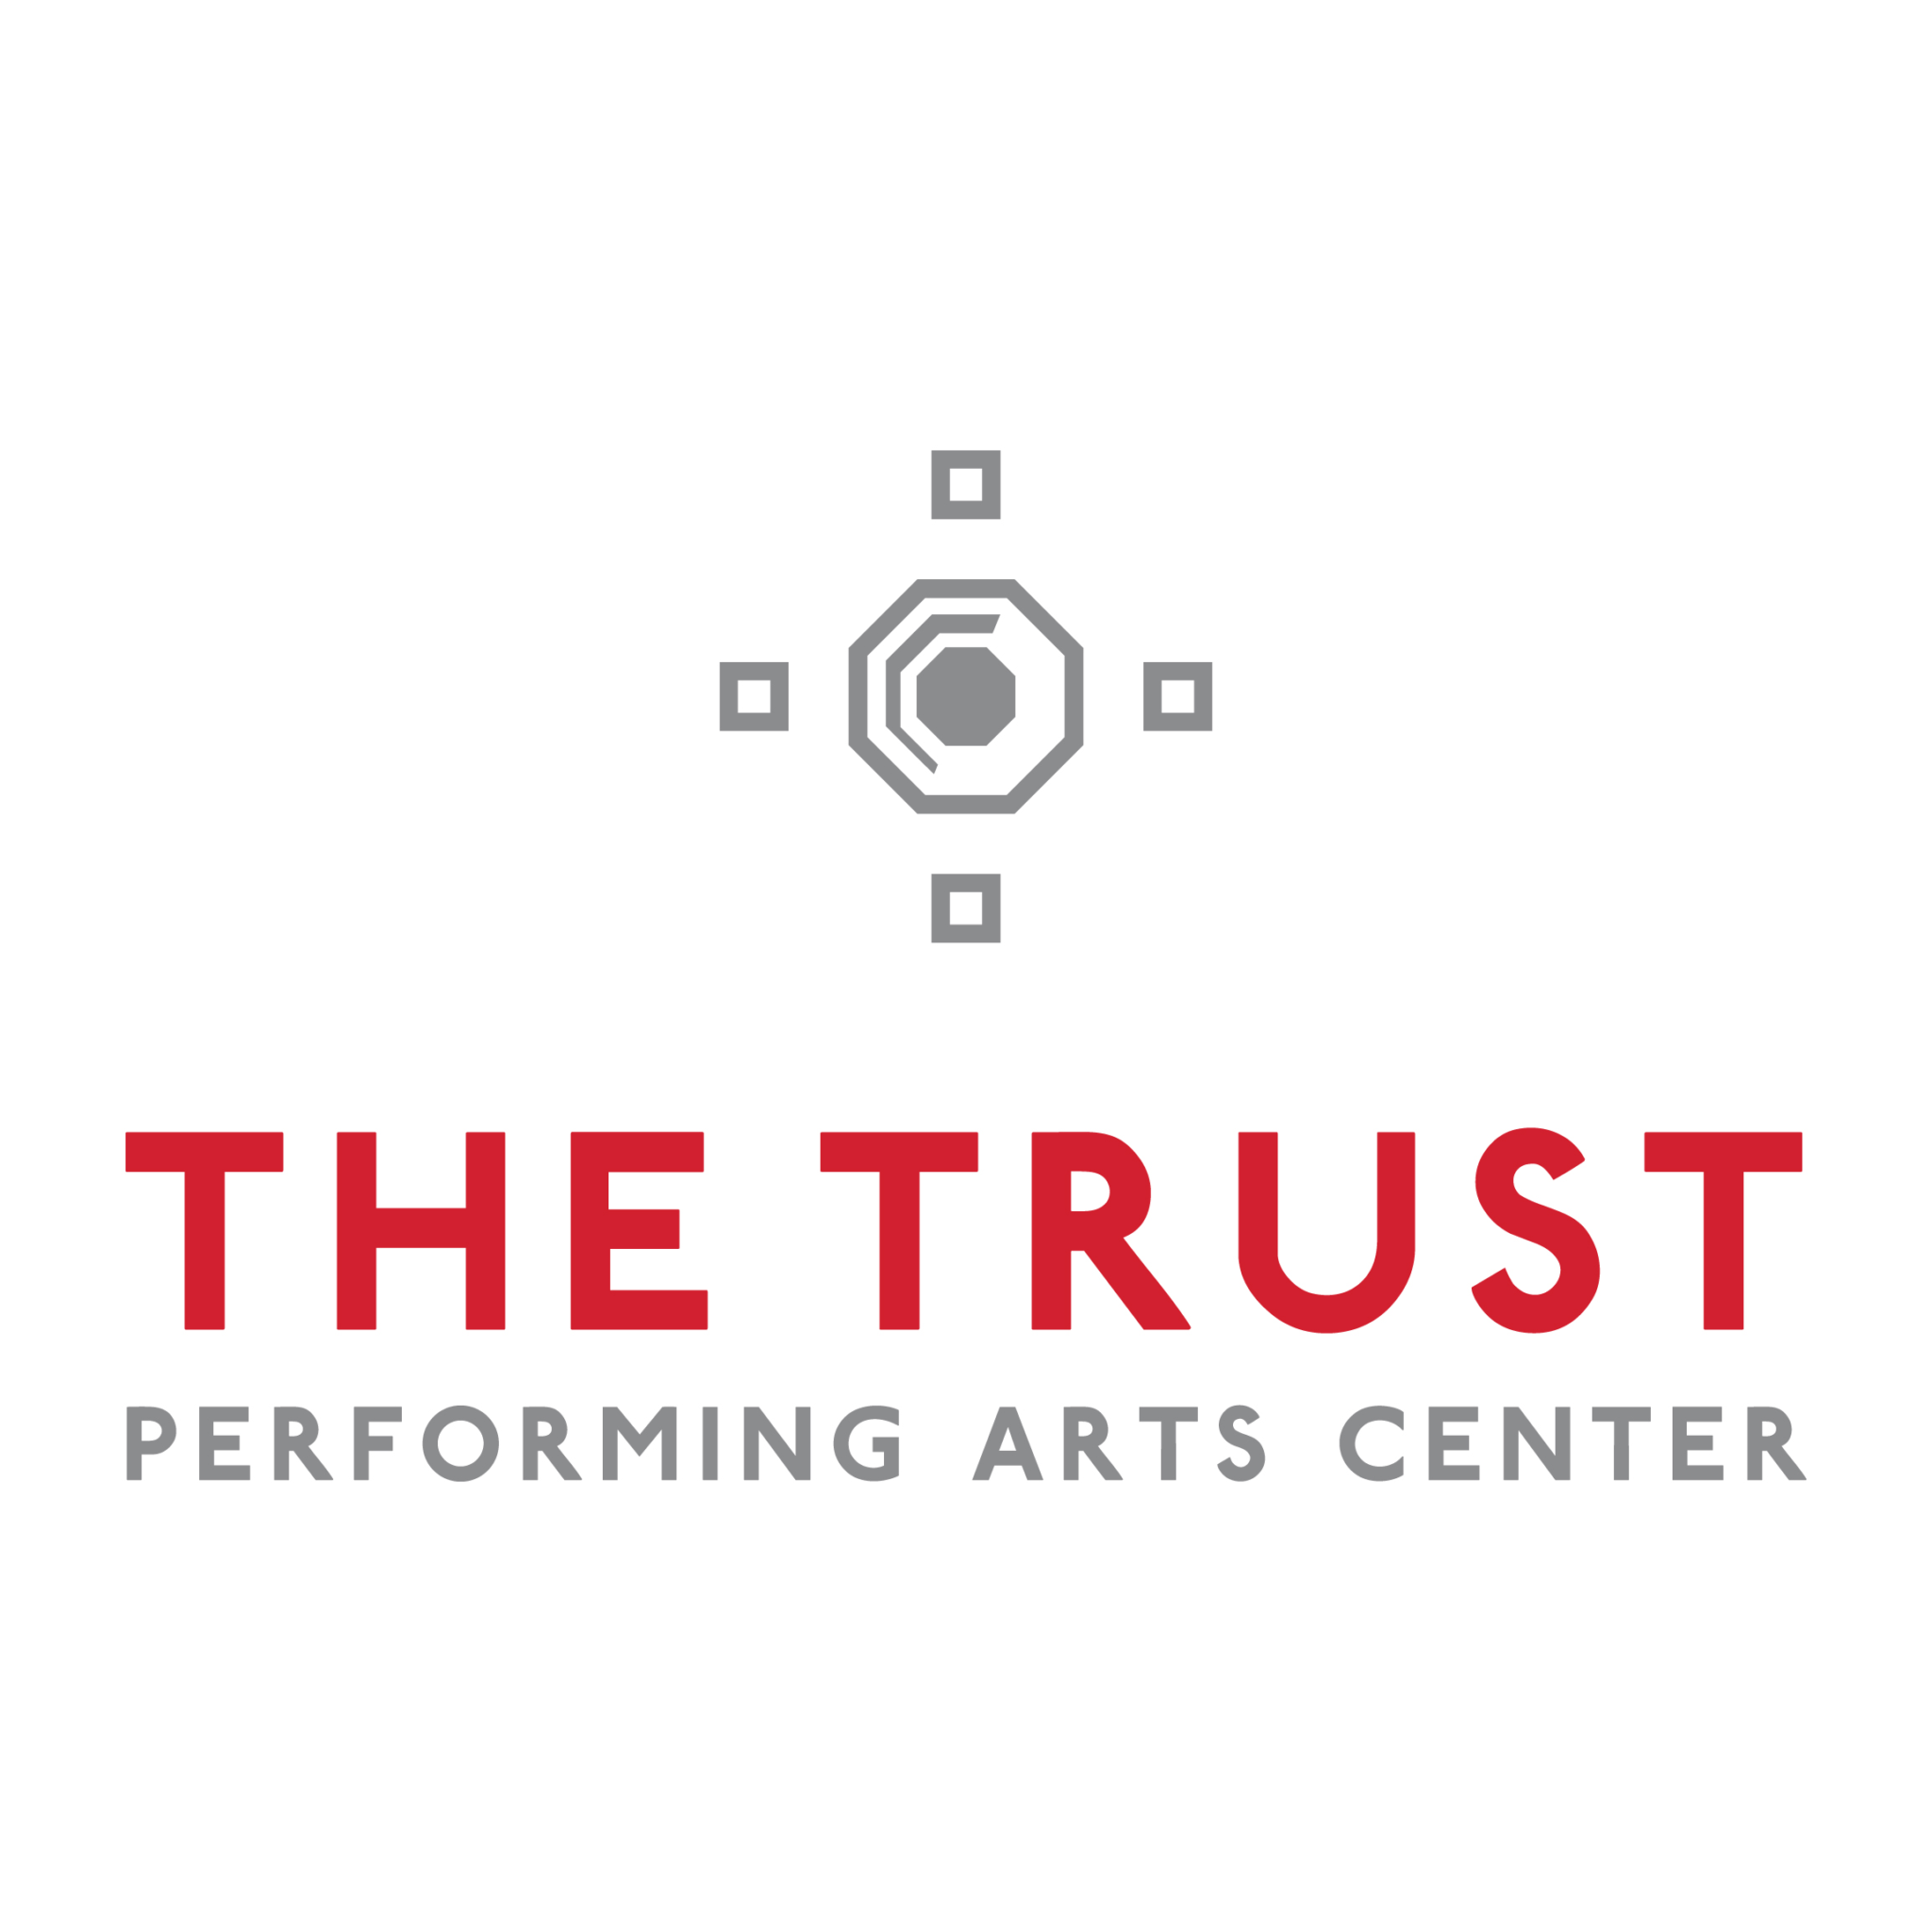 Lancaster Logo - About The Trust Performing Arts Center in Lancaster, PA